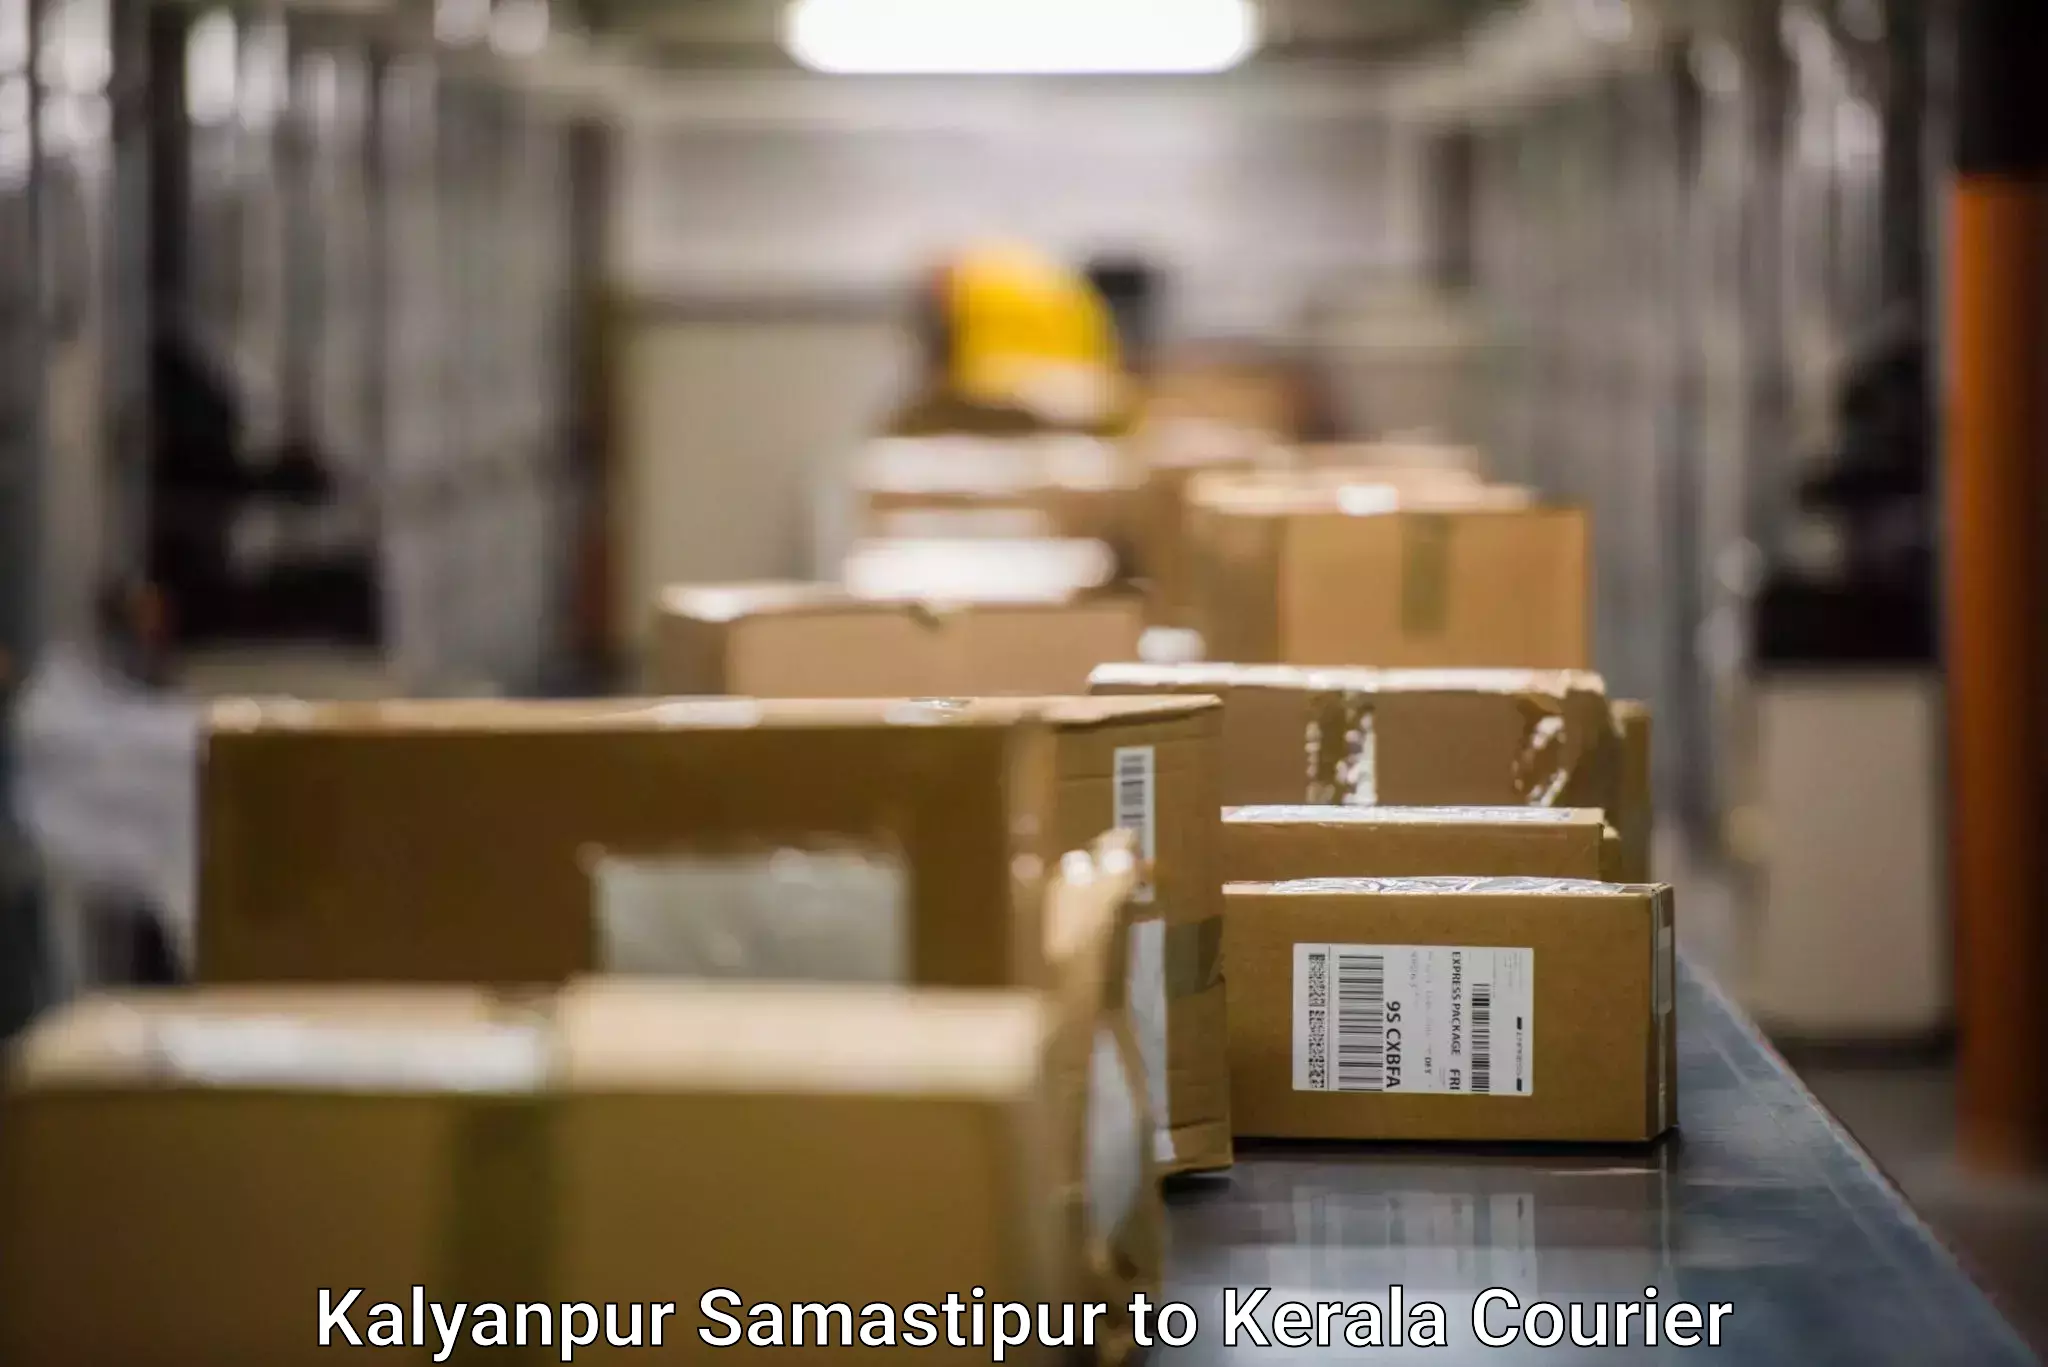 On-call courier service Kalyanpur Samastipur to Adur Kla